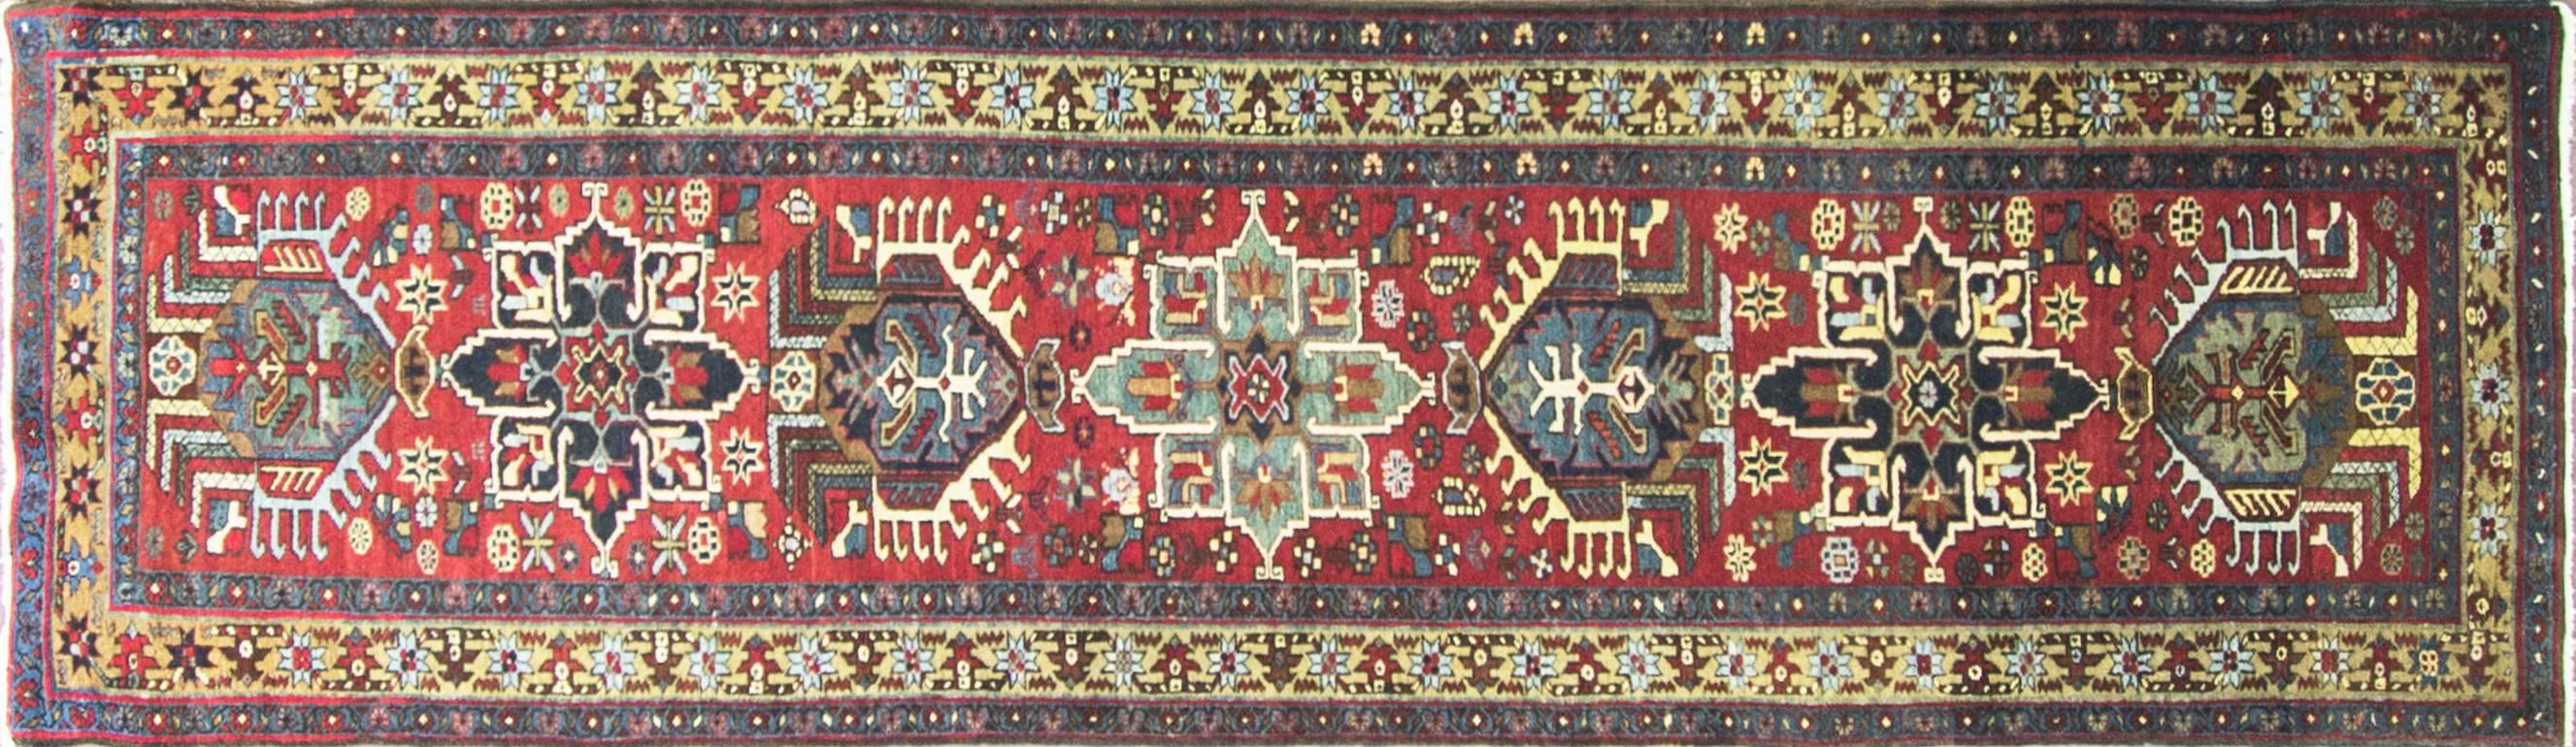 Beautiful combination of the tan color border and the red multi field colors with a spectacular design.
Heriz rugs are Persian rugs from the area of Heriz, East Azerbaijan in Northwest Iran, Northeast of Tabriz. Such rugs are produced in the village